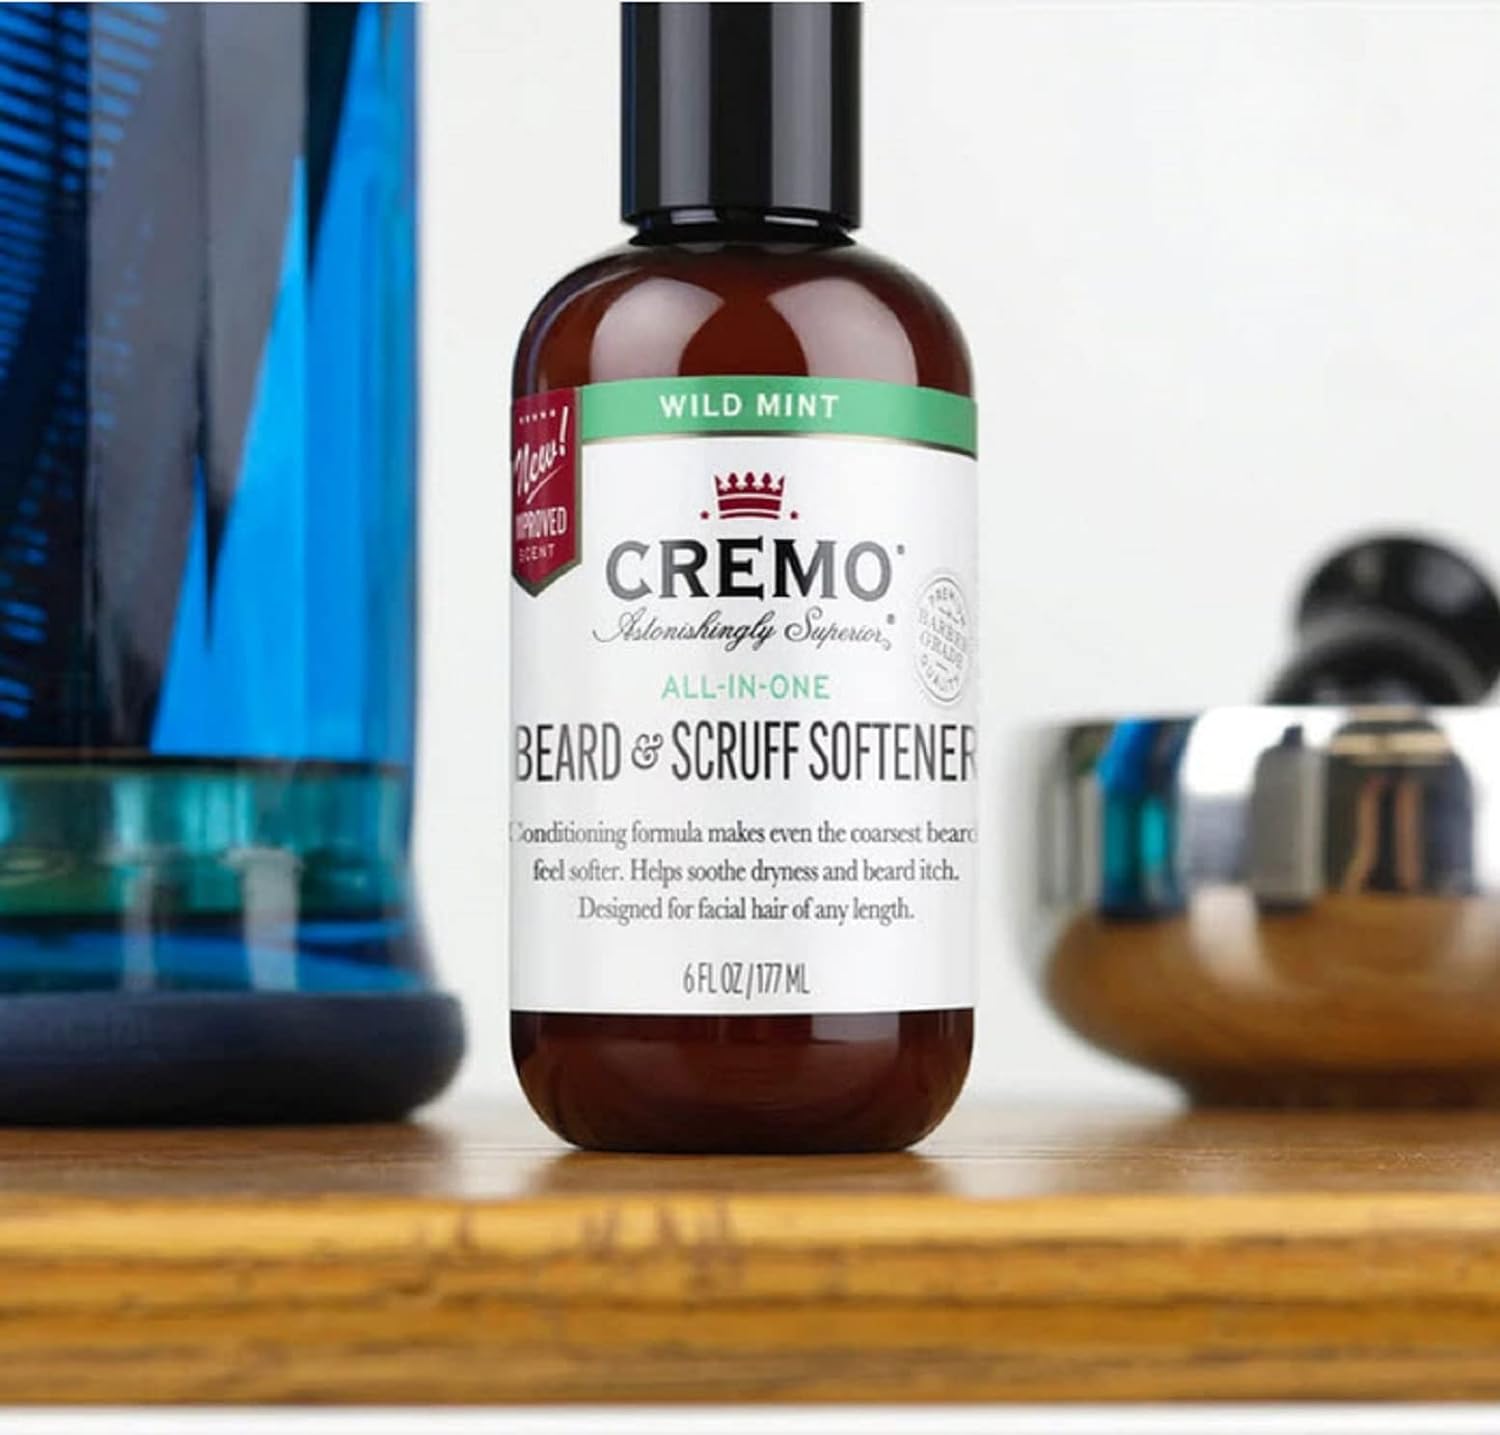 Cremo Wild Mint Beard & Scruff Softener, Softens and Conditions Coarse Facial Hair of All Lengths in Just 30 Seconds, 6 Fl Oz : Beauty & Personal Care